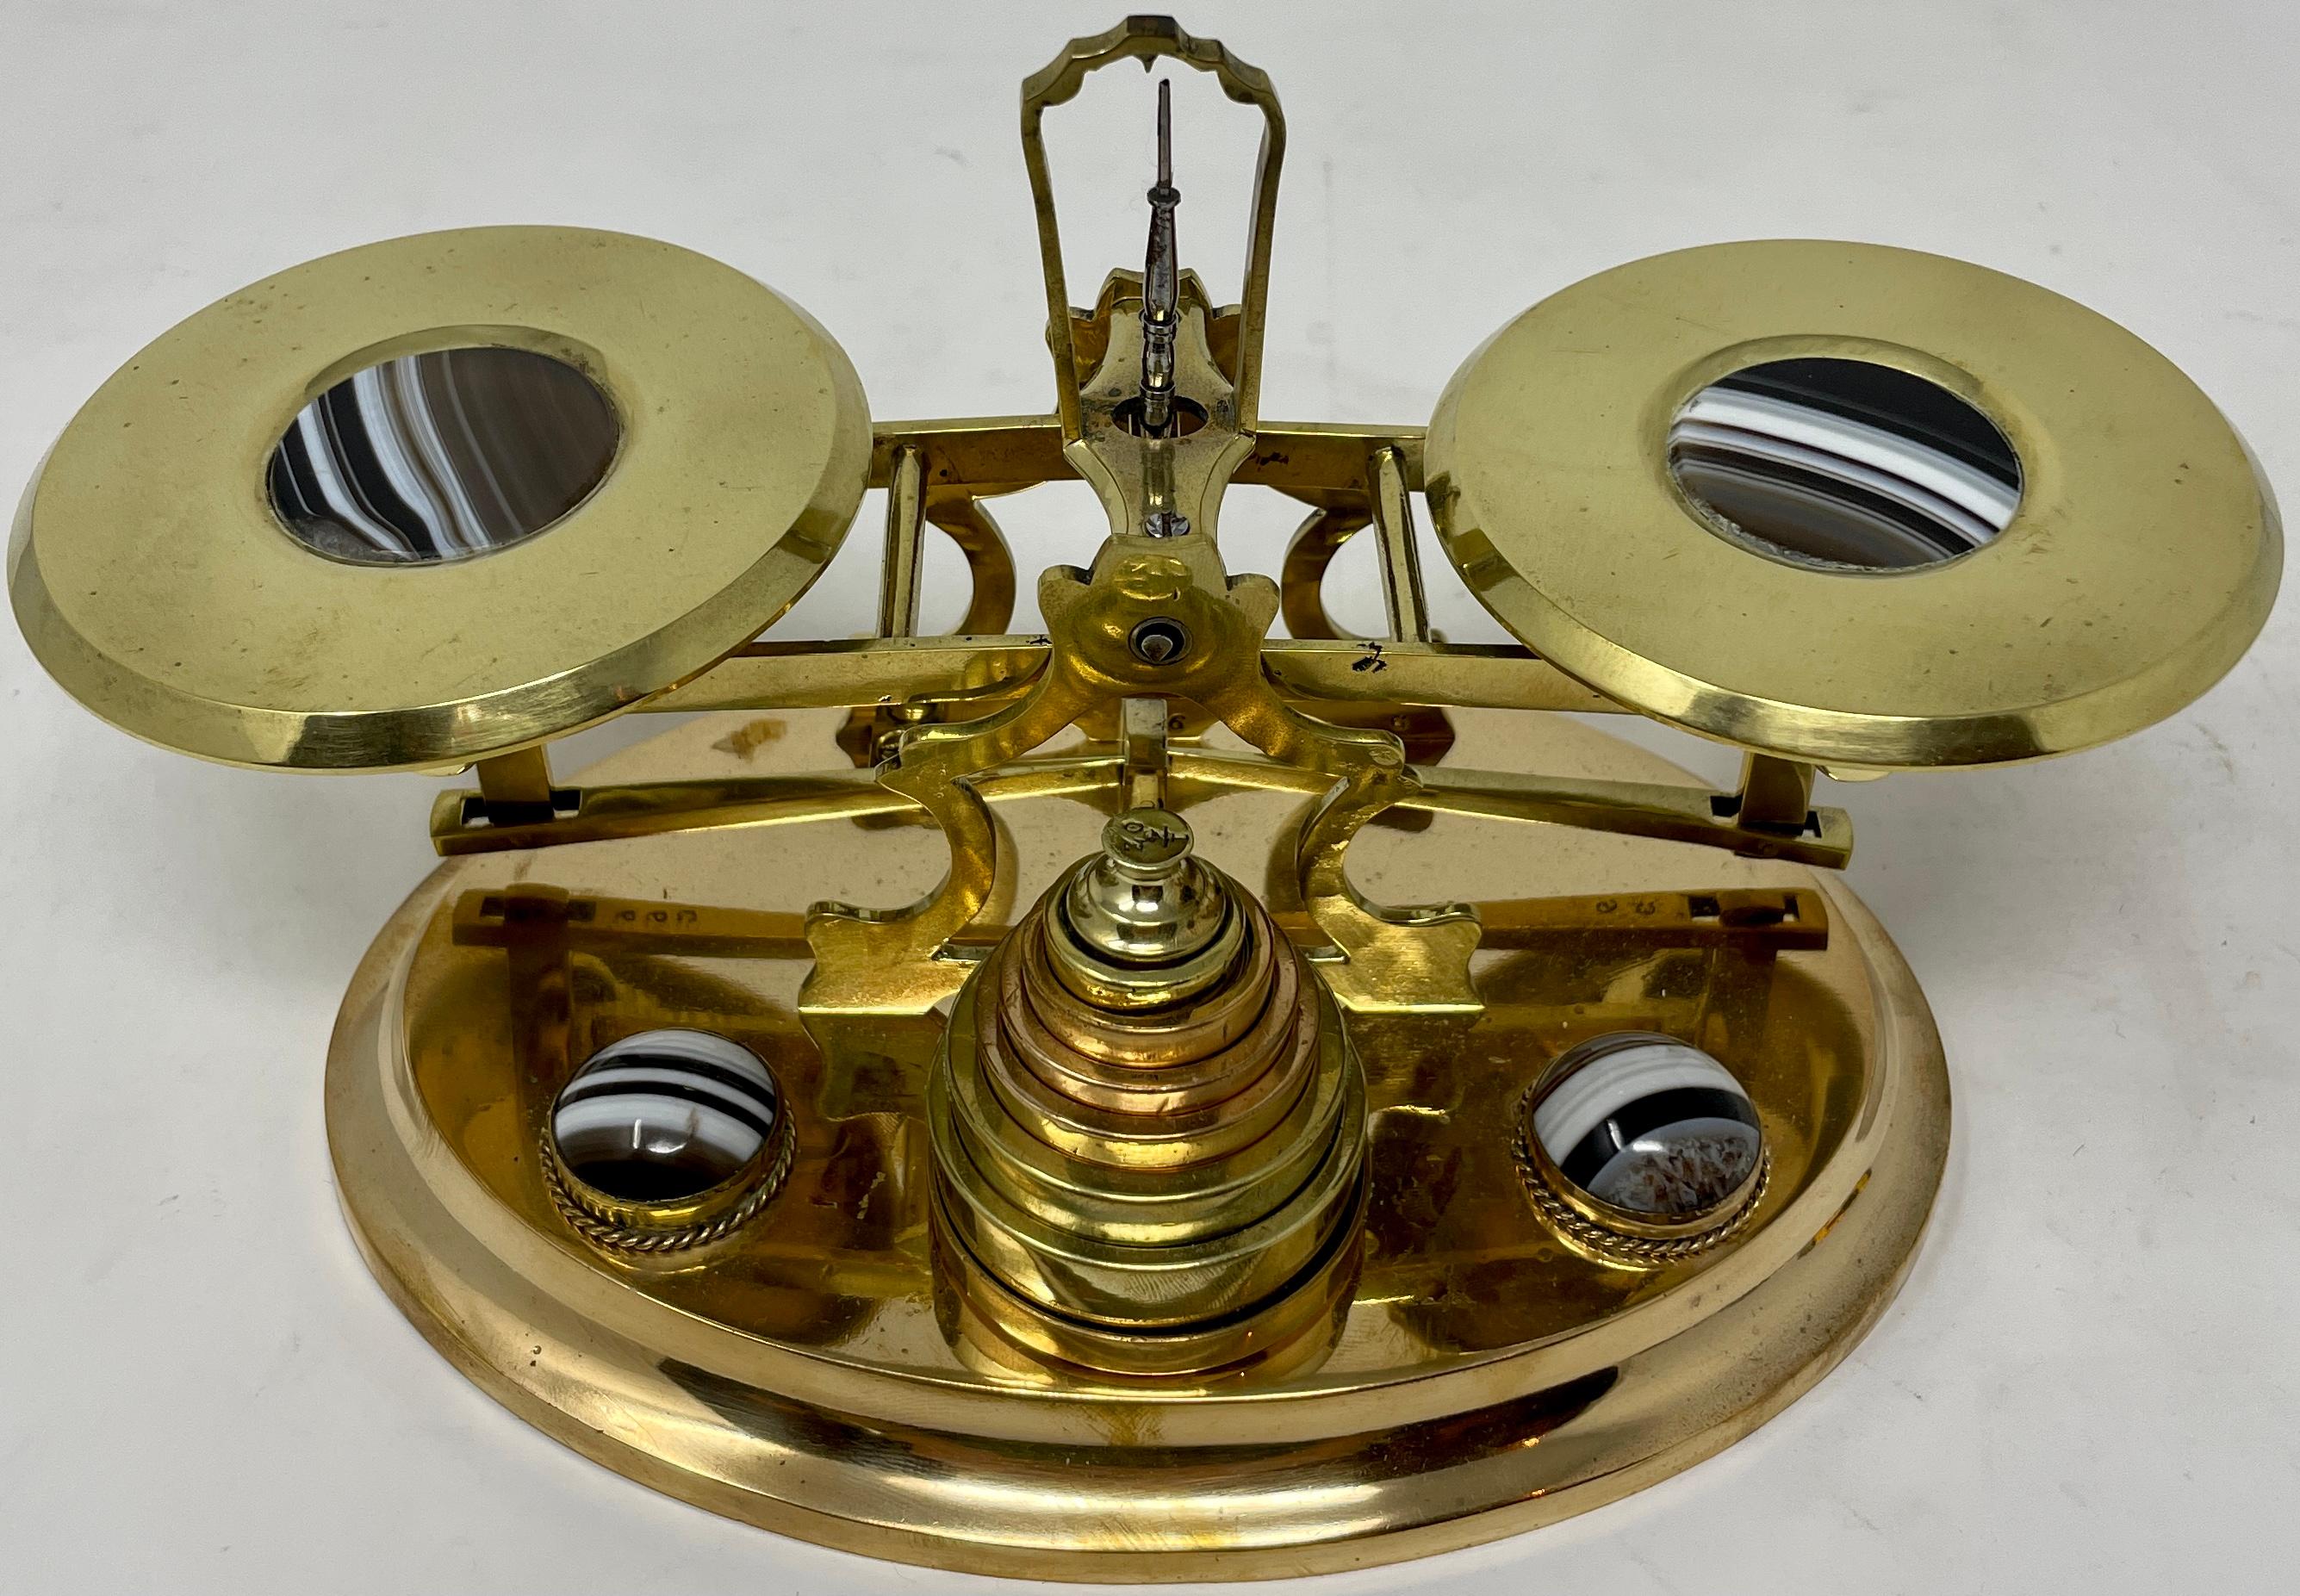 Antique Victorian Brass and Scottish Agate Postal scale with Weights, Circa 1865-1870.